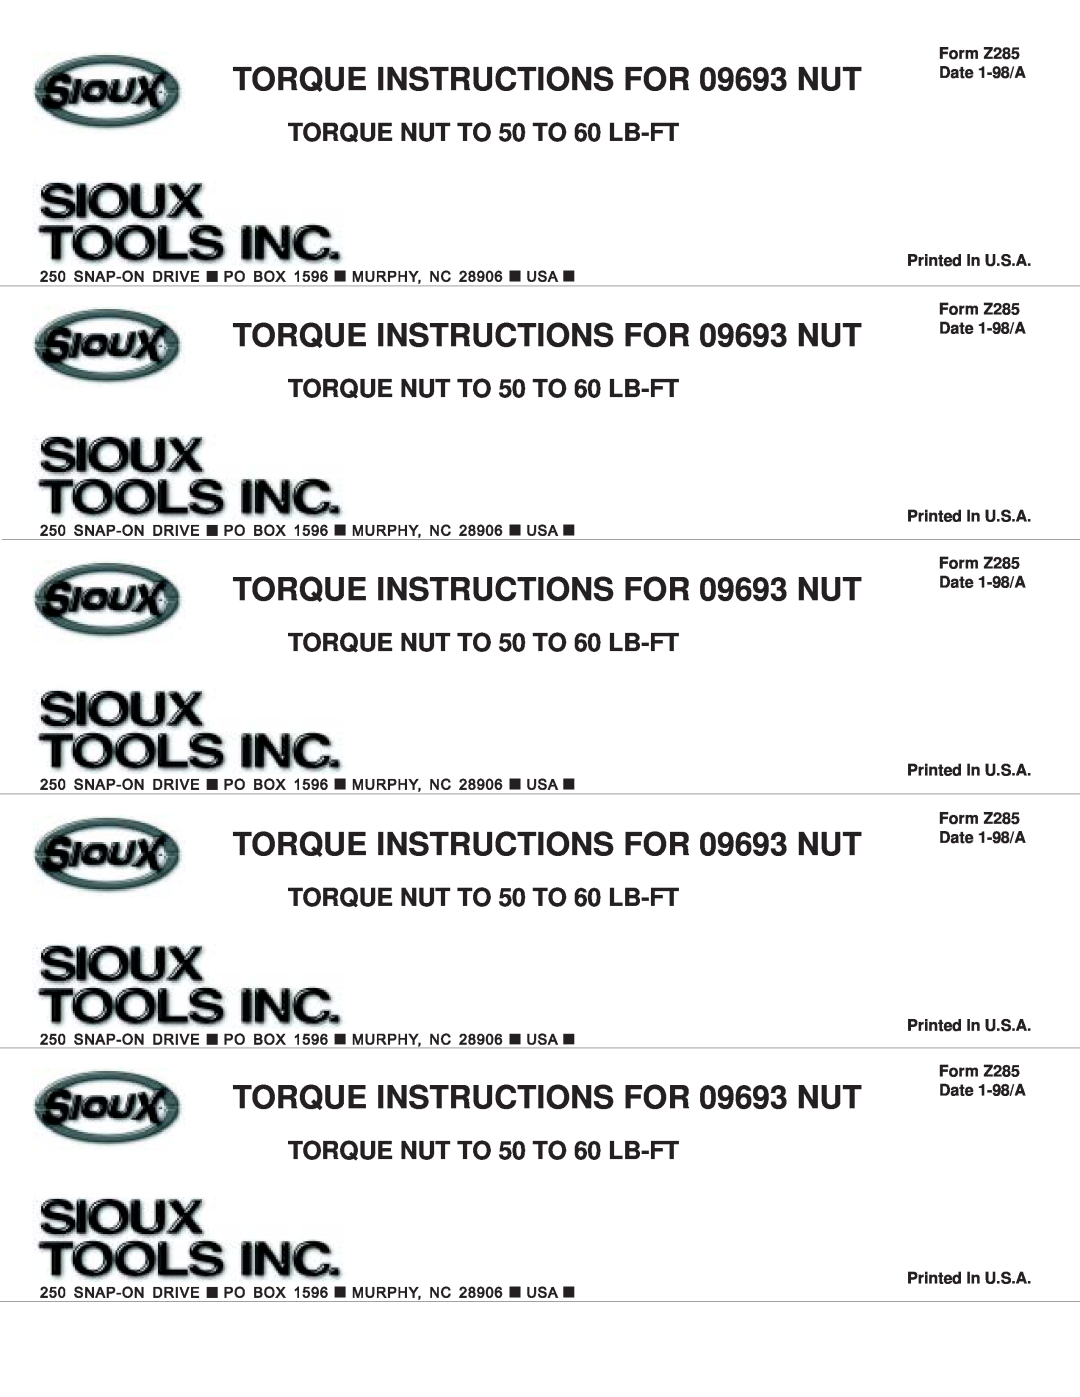 Sioux Tools manual TORQUE INSTRUCTIONS FOR 09693 NUT, TORQUE NUT TO 50 TO 60 LB-FT, Form Z285 Date 1-98/A 